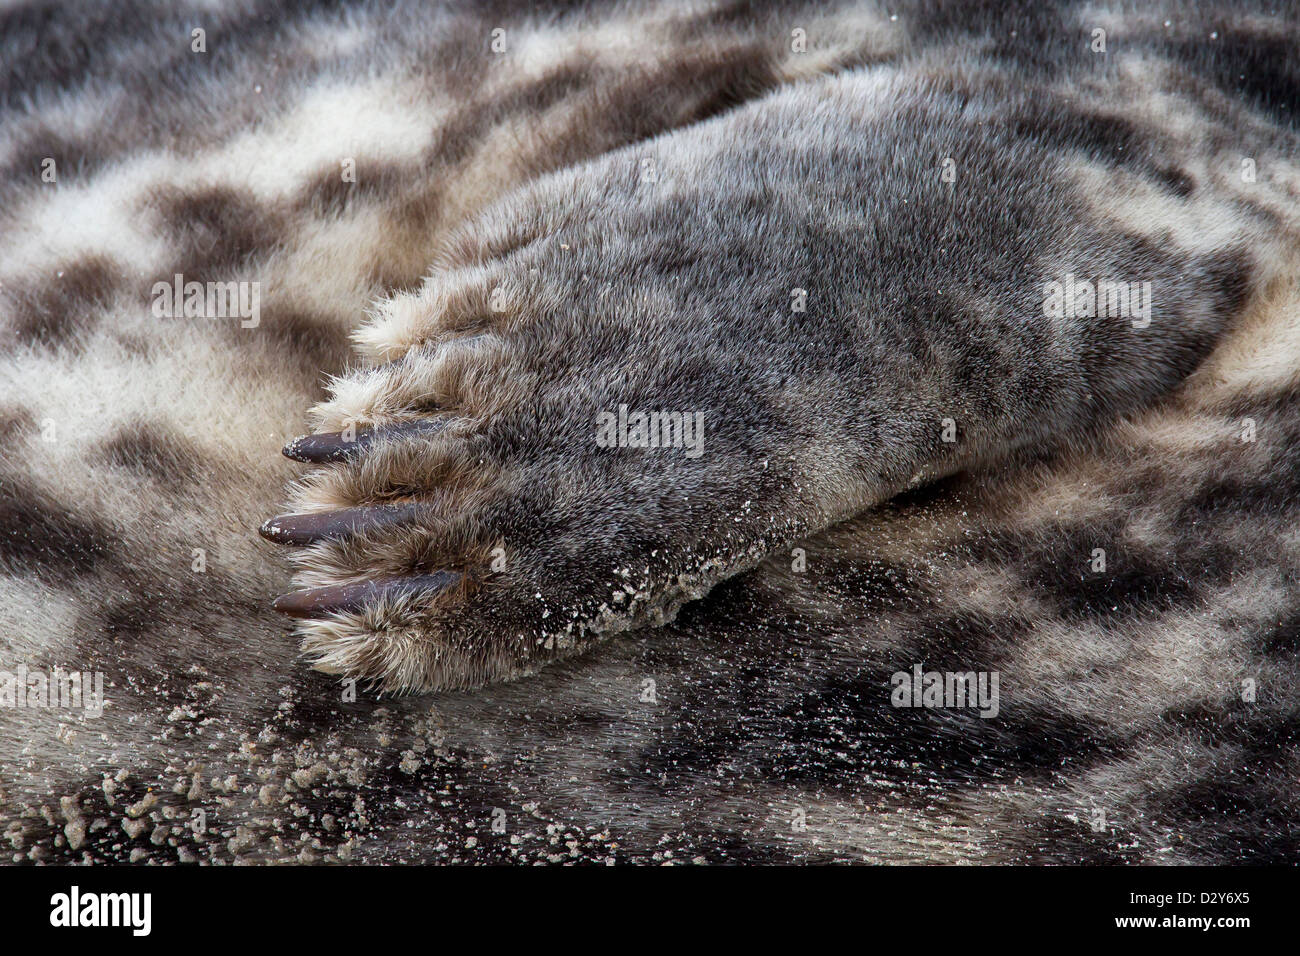 Grey seal / gray seal (Halichoerus grypus) resting on beach, close up of fore flipper and claws Stock Photo